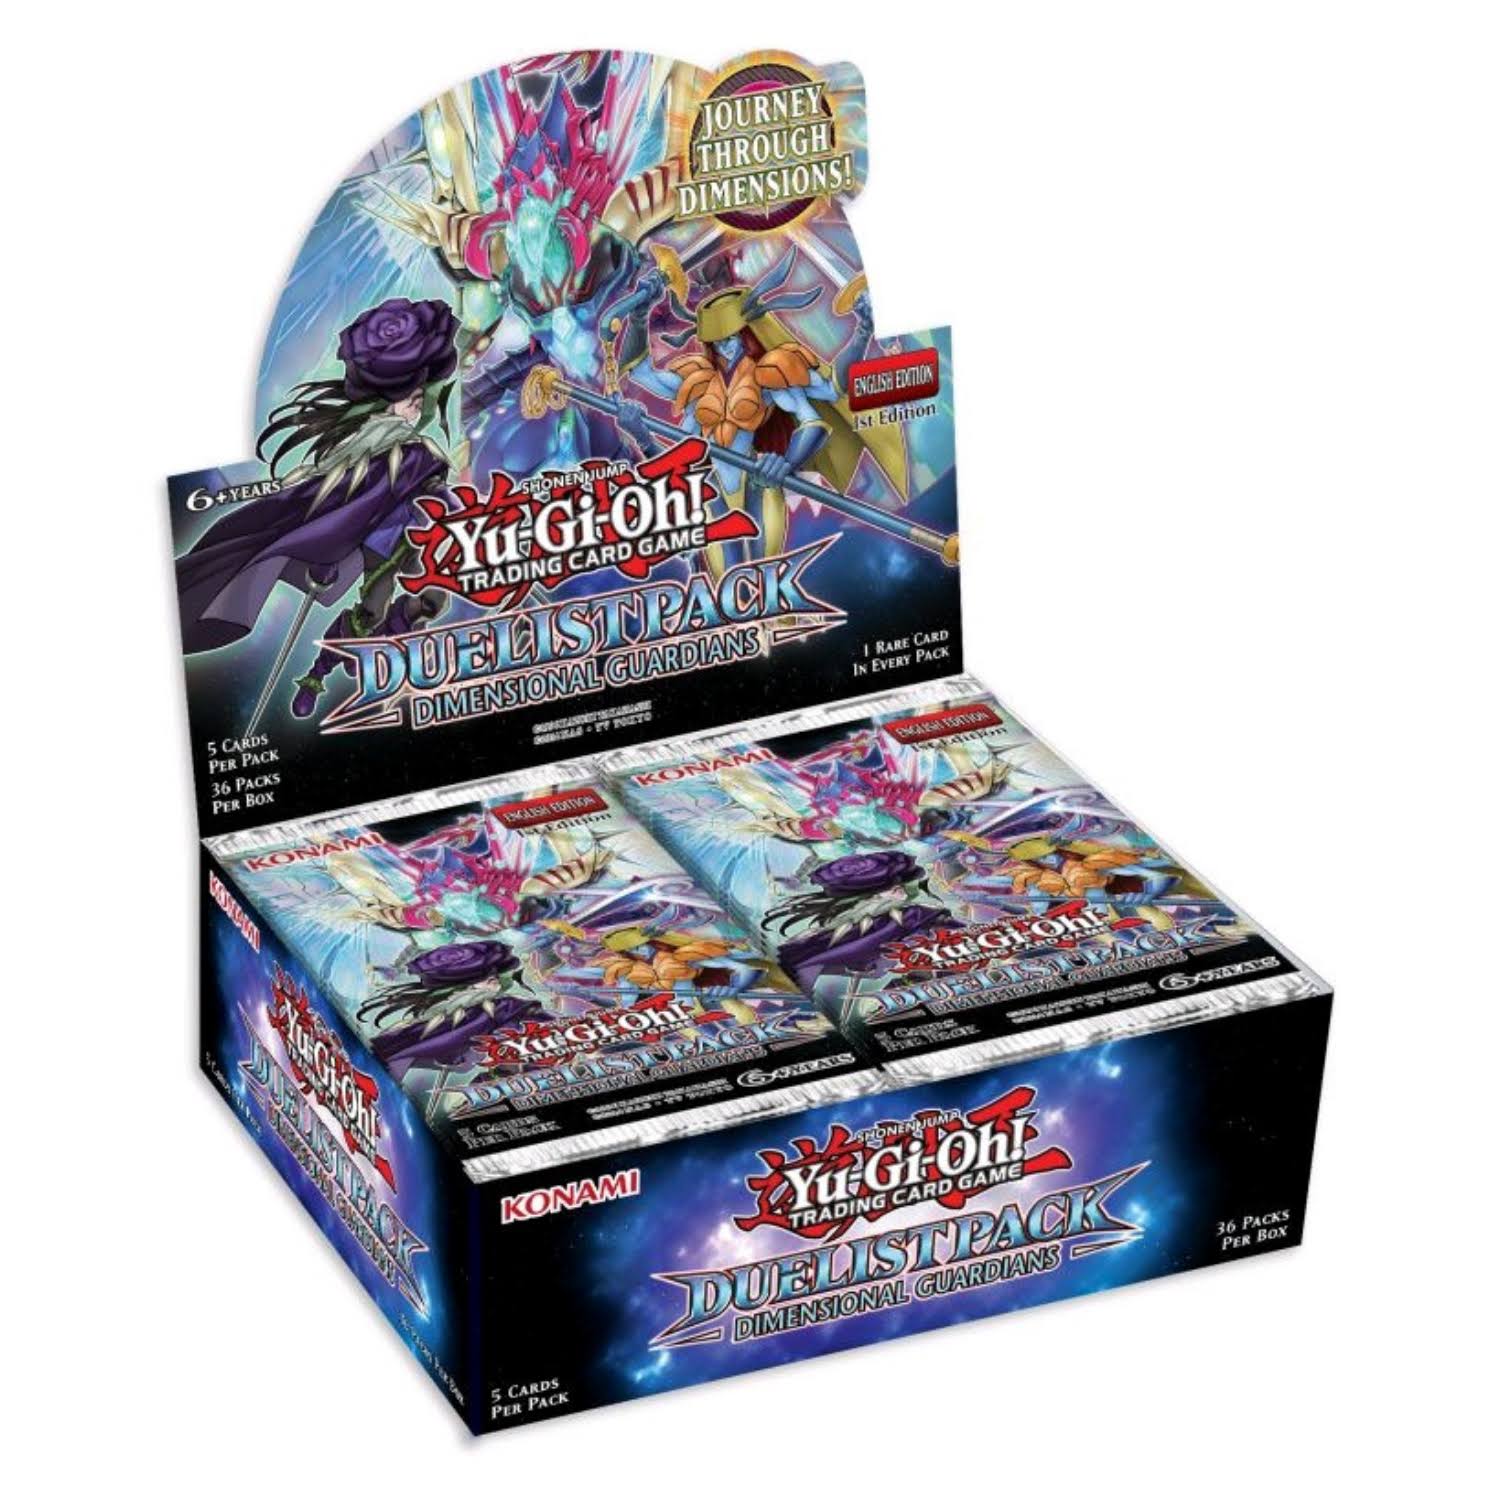 Yu-Gi-Oh! Duelist Pack Dimensional Guardians Booster Box